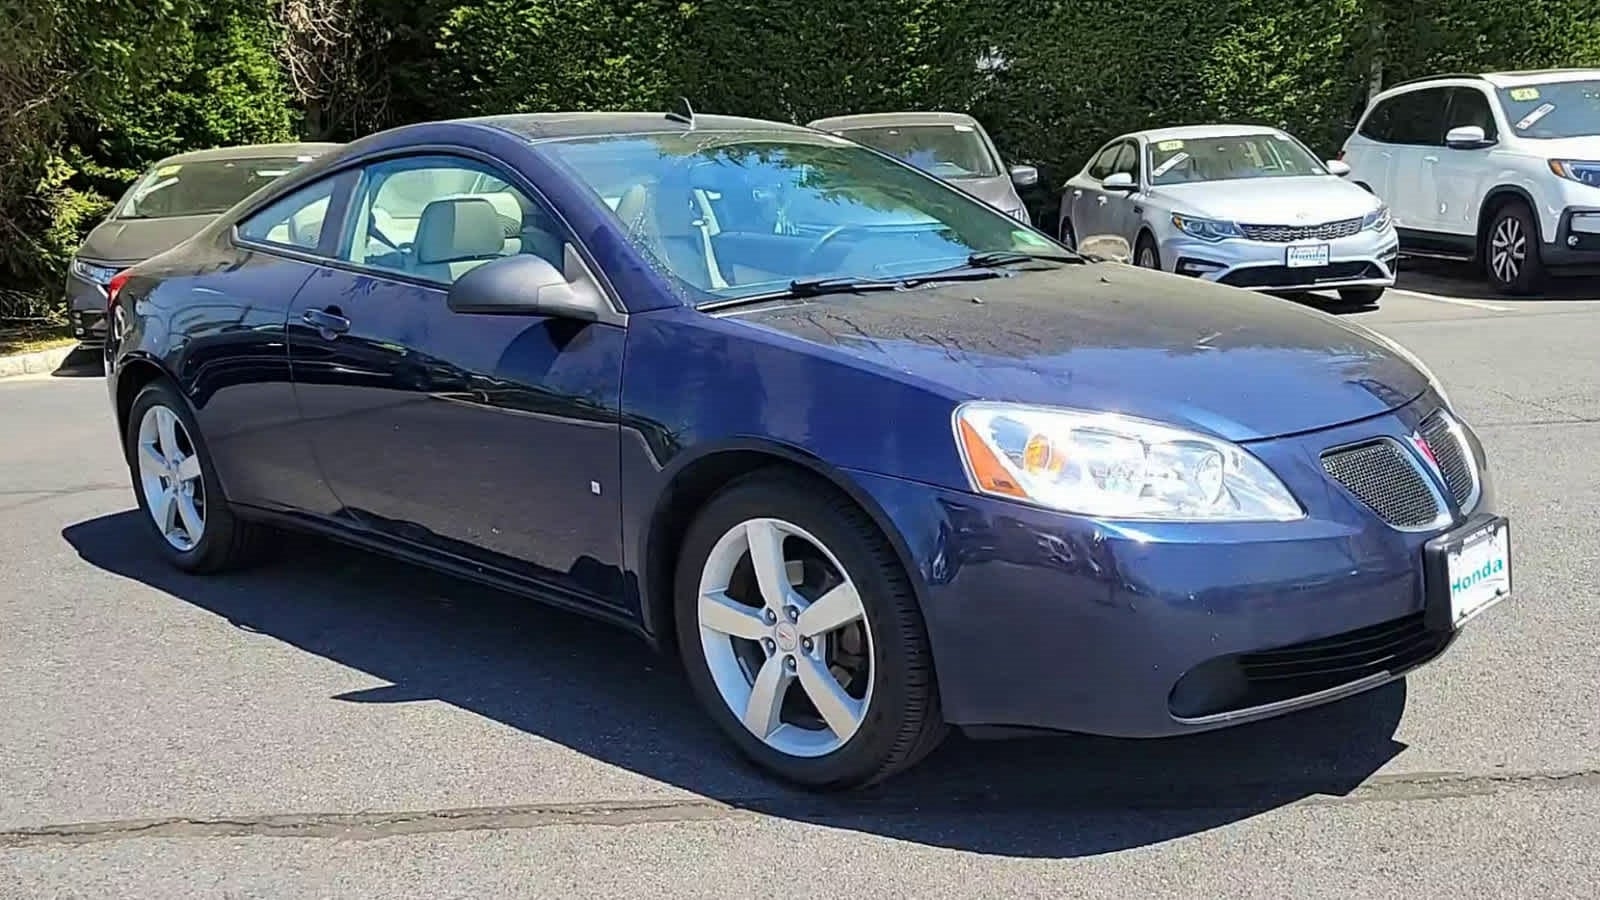 Used 2008 Pontiac G6 GT with VIN 1G2ZH17N684282905 for sale in Hamilton Township, NJ